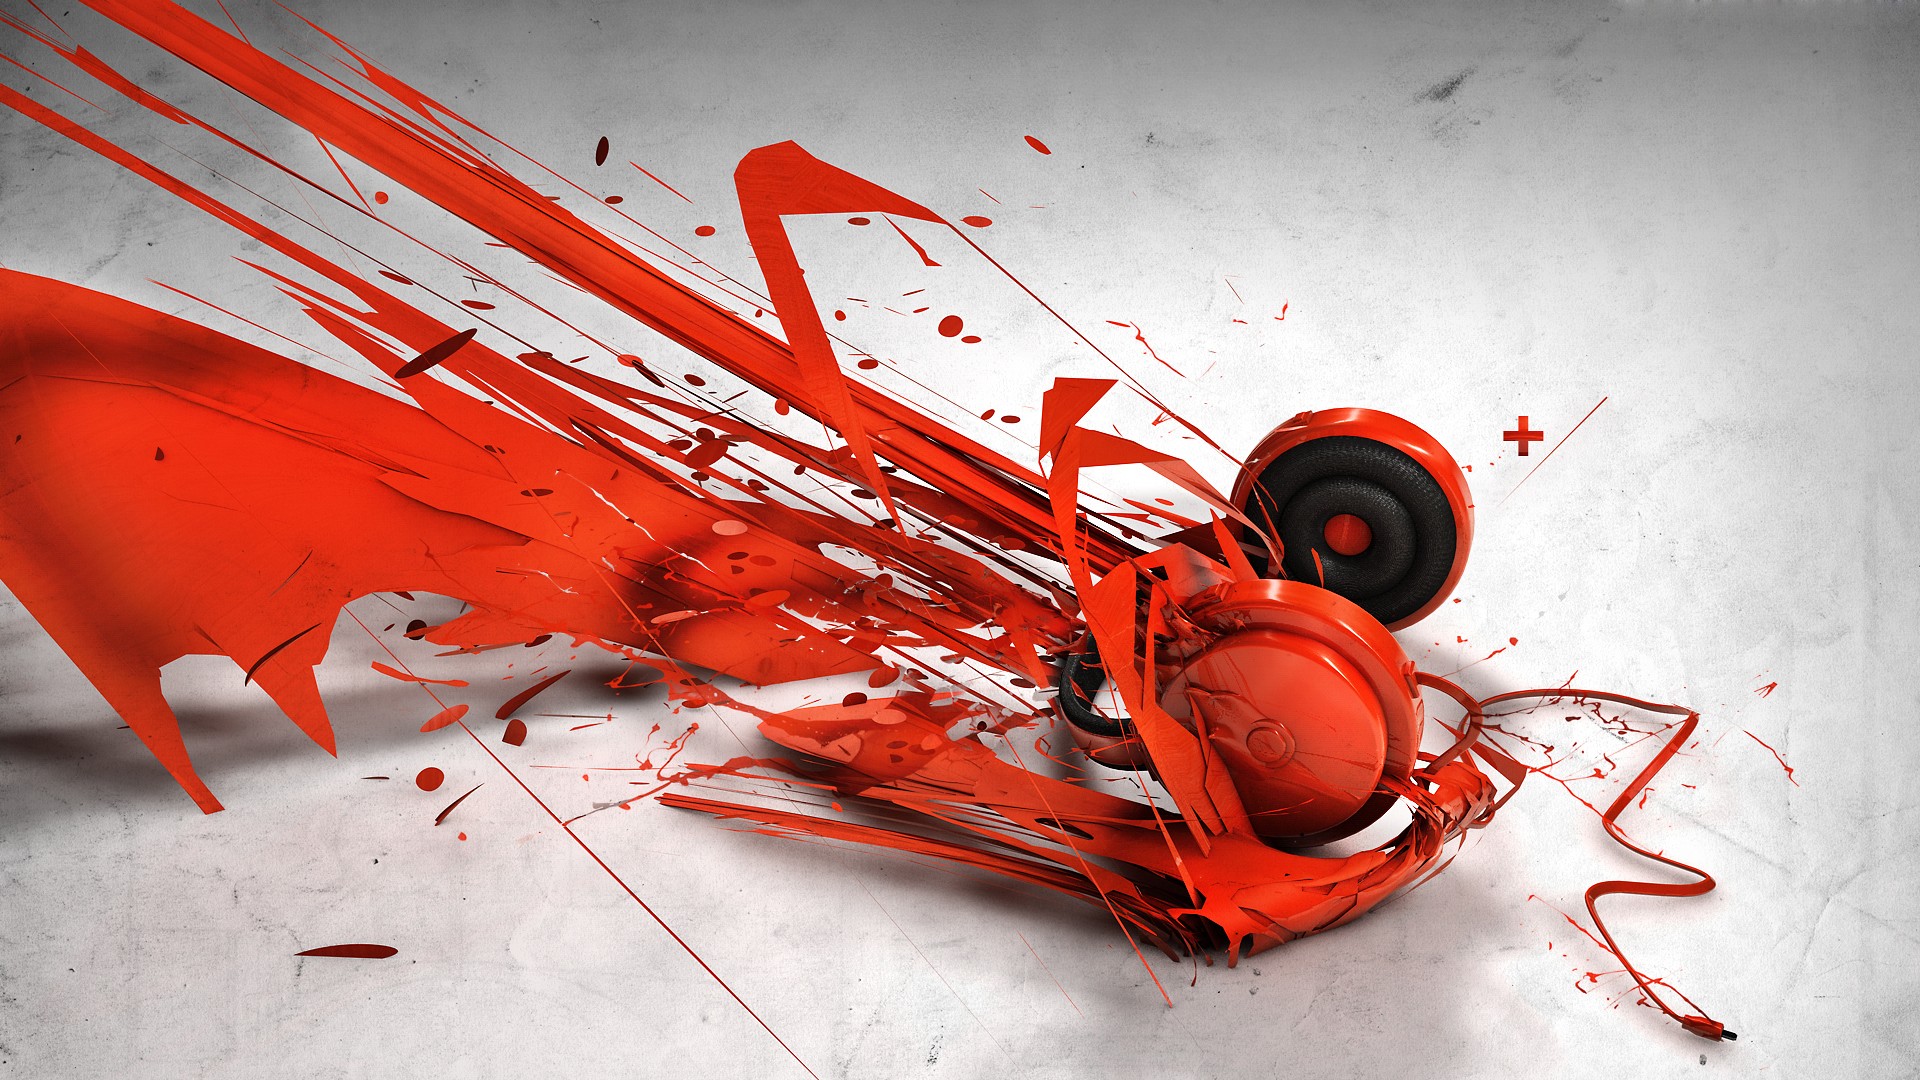 General 1920x1080 headphones colorful abstract 3D Abstract digital art